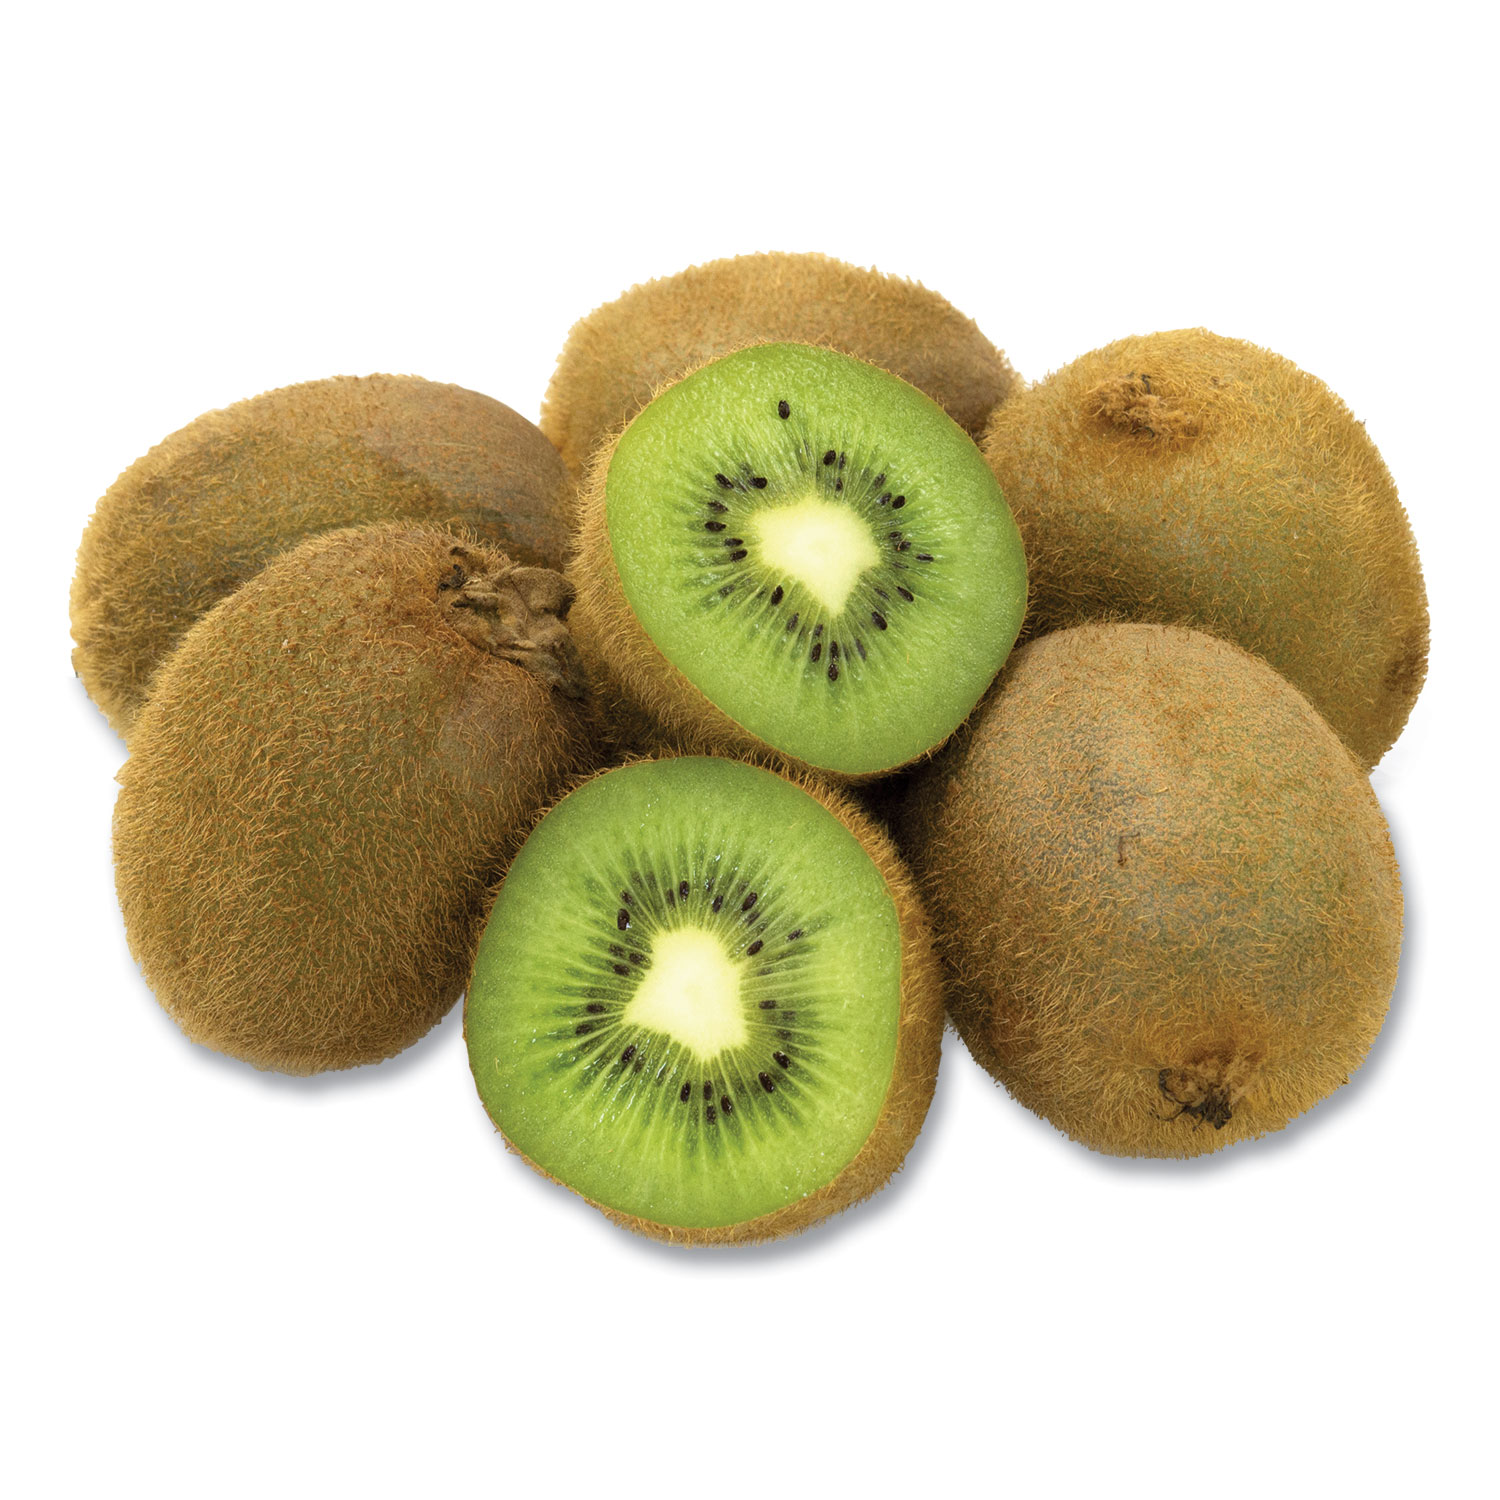 National Brand Fresh Kiwi, 3 lbs, Free Delivery in 1-4 Business Days